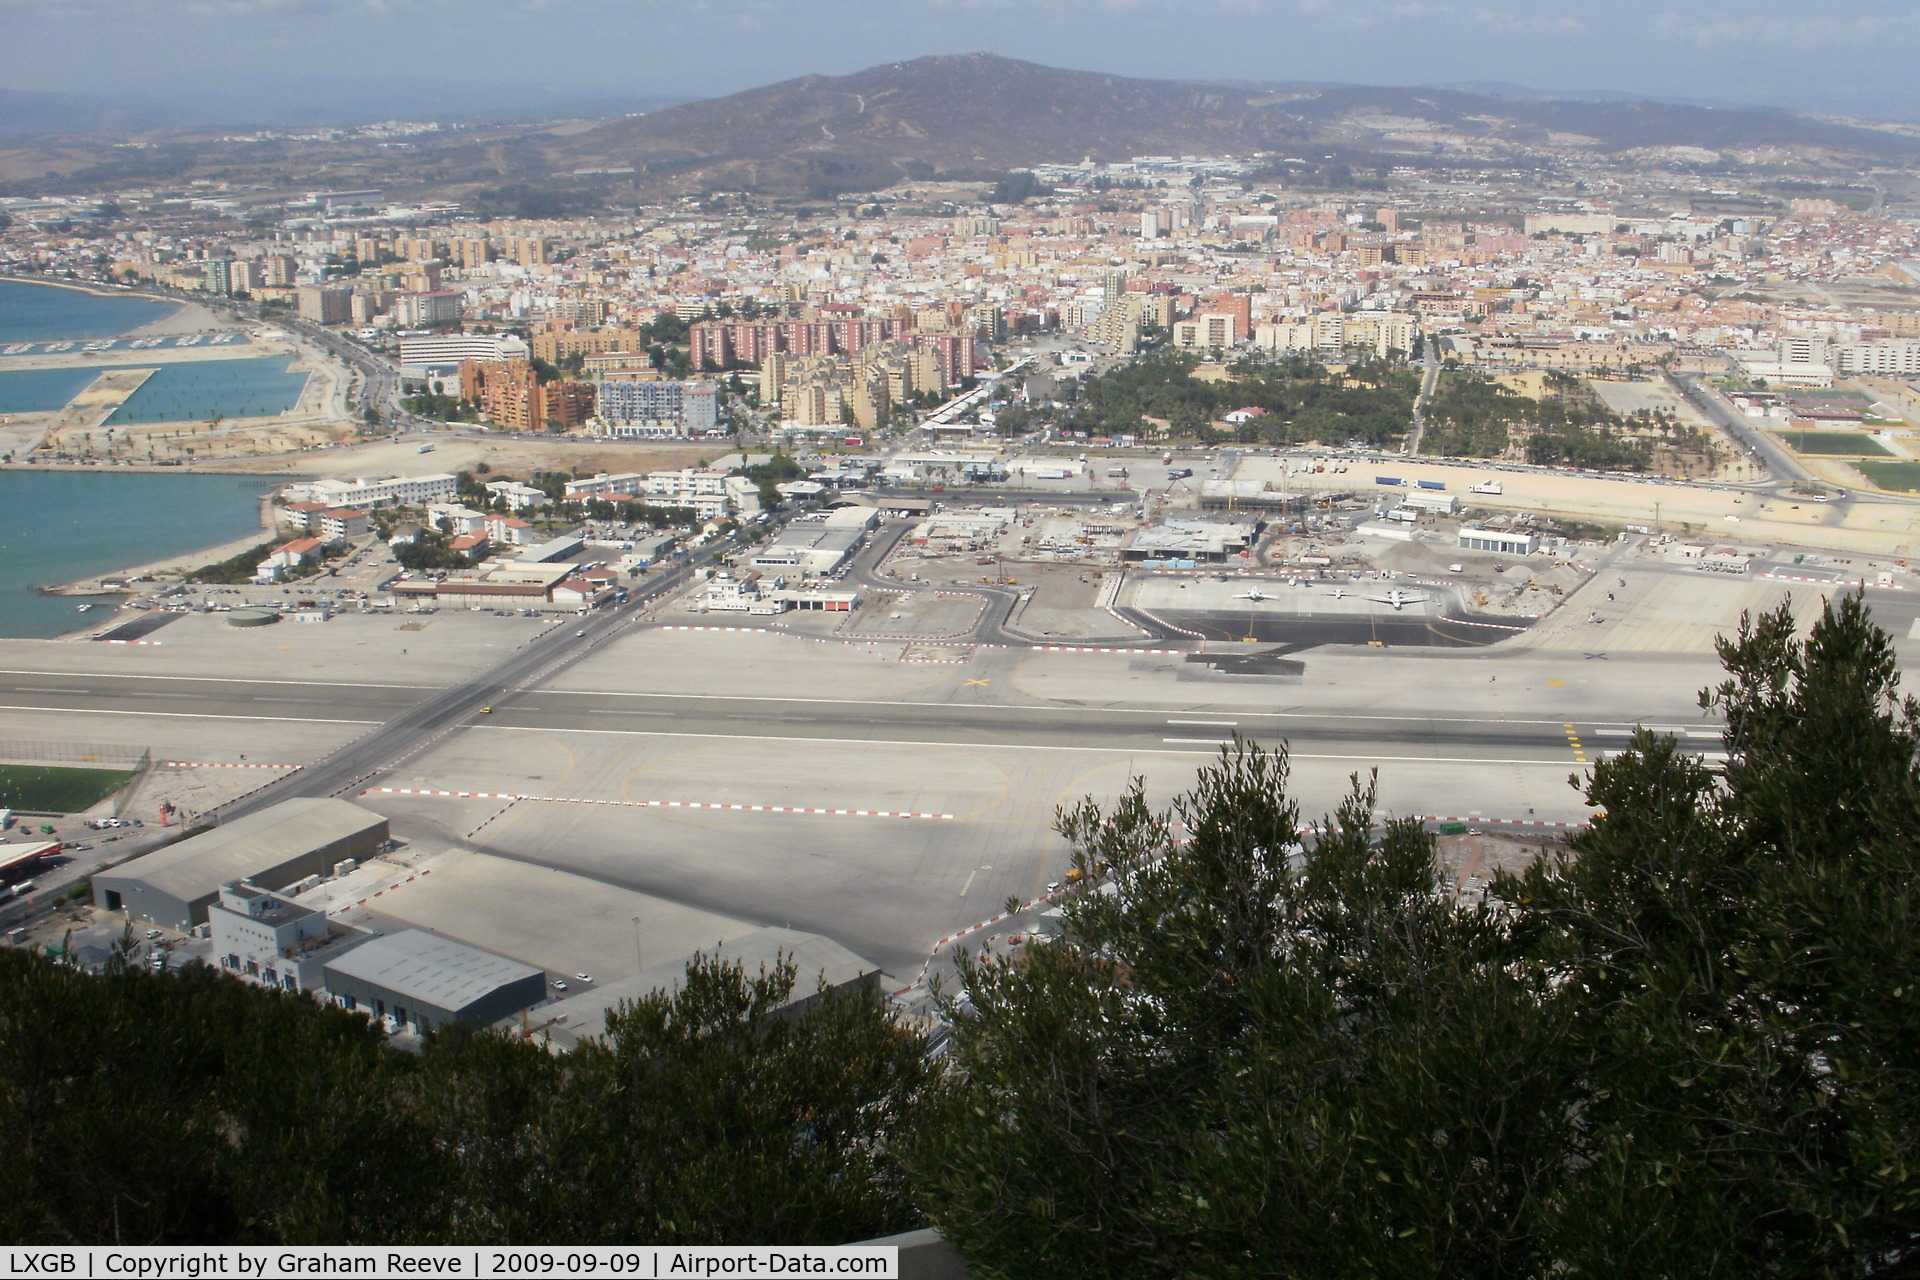 Gibraltar Airport, Gibraltar Gibraltar (LXGB) - The old Gibraltar Airport with the current terminal building under construction. 